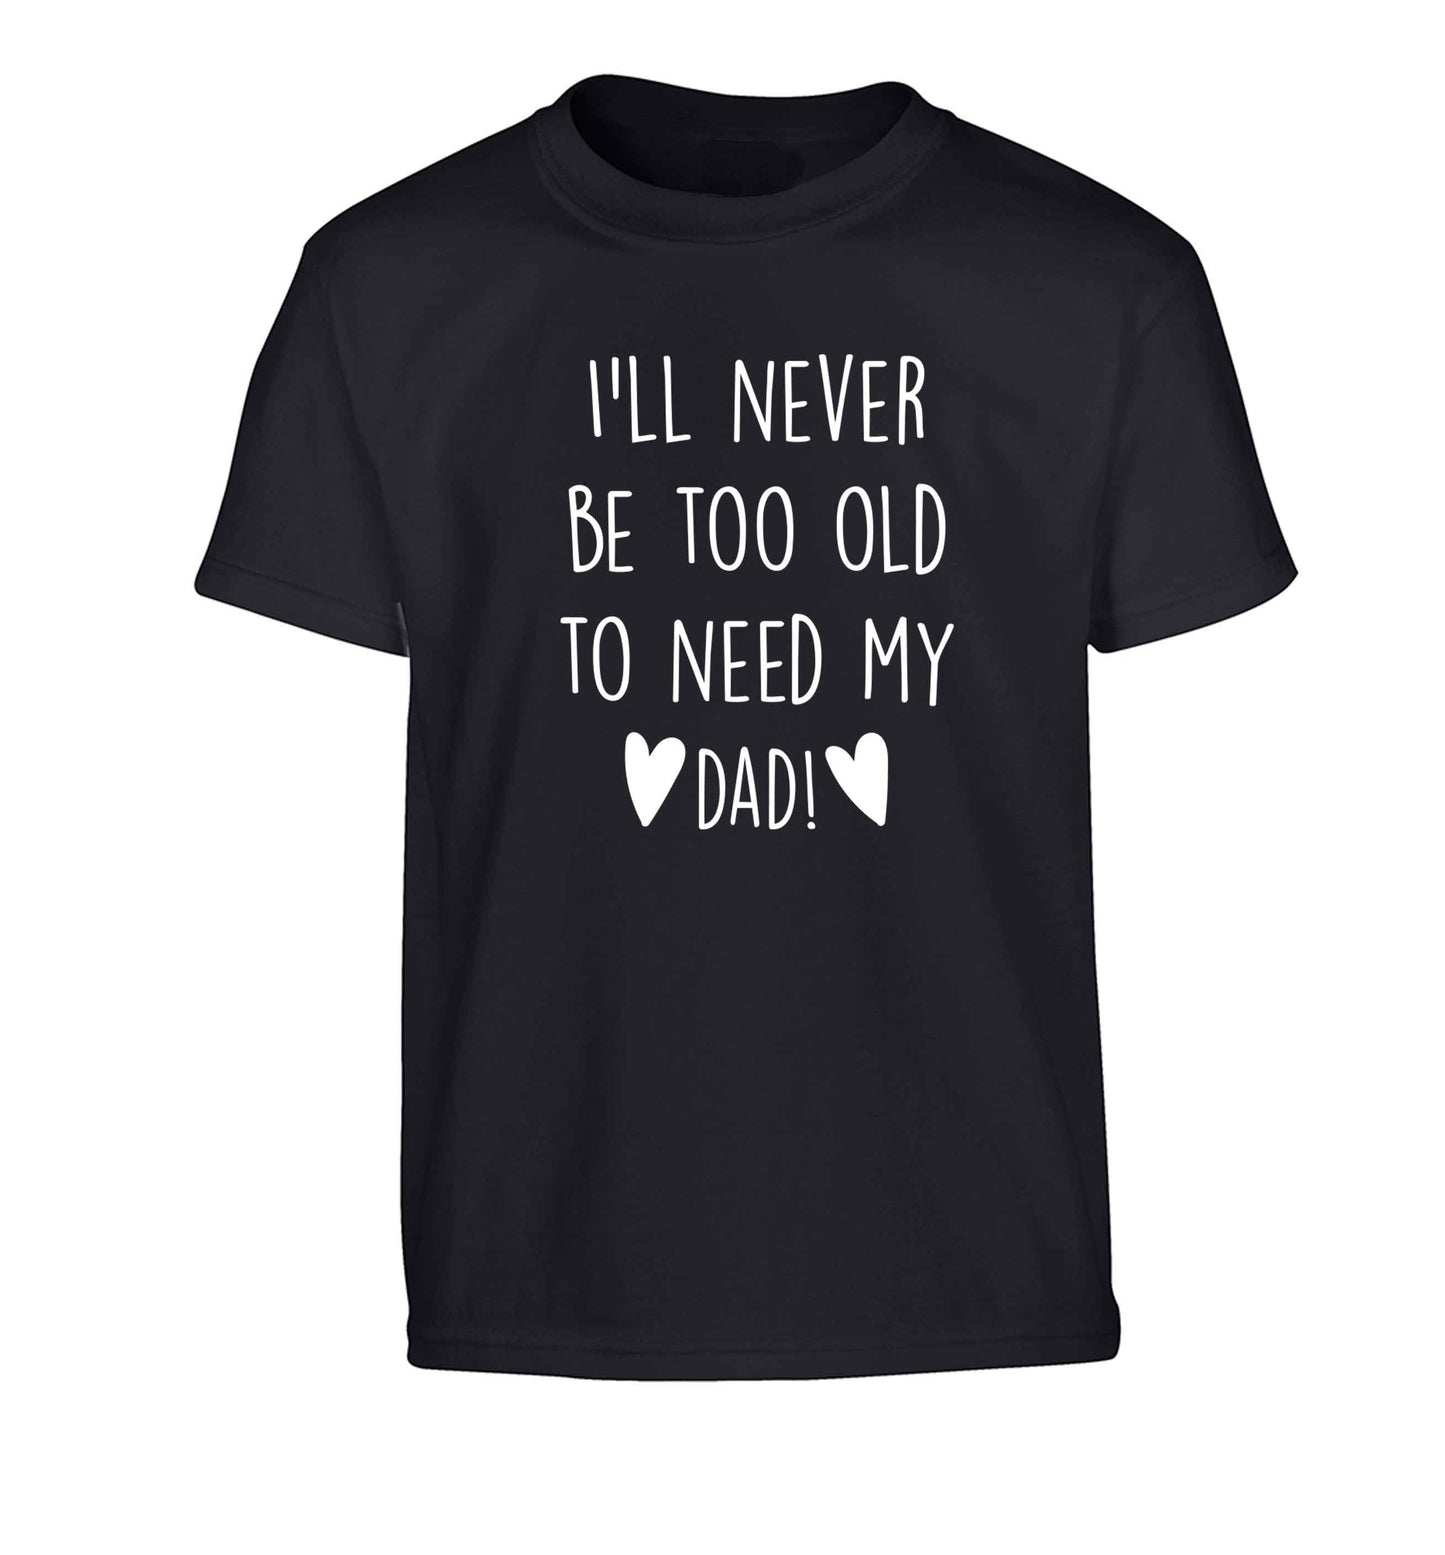 I'll never be too old to need my dad Children's black Tshirt 12-13 Years